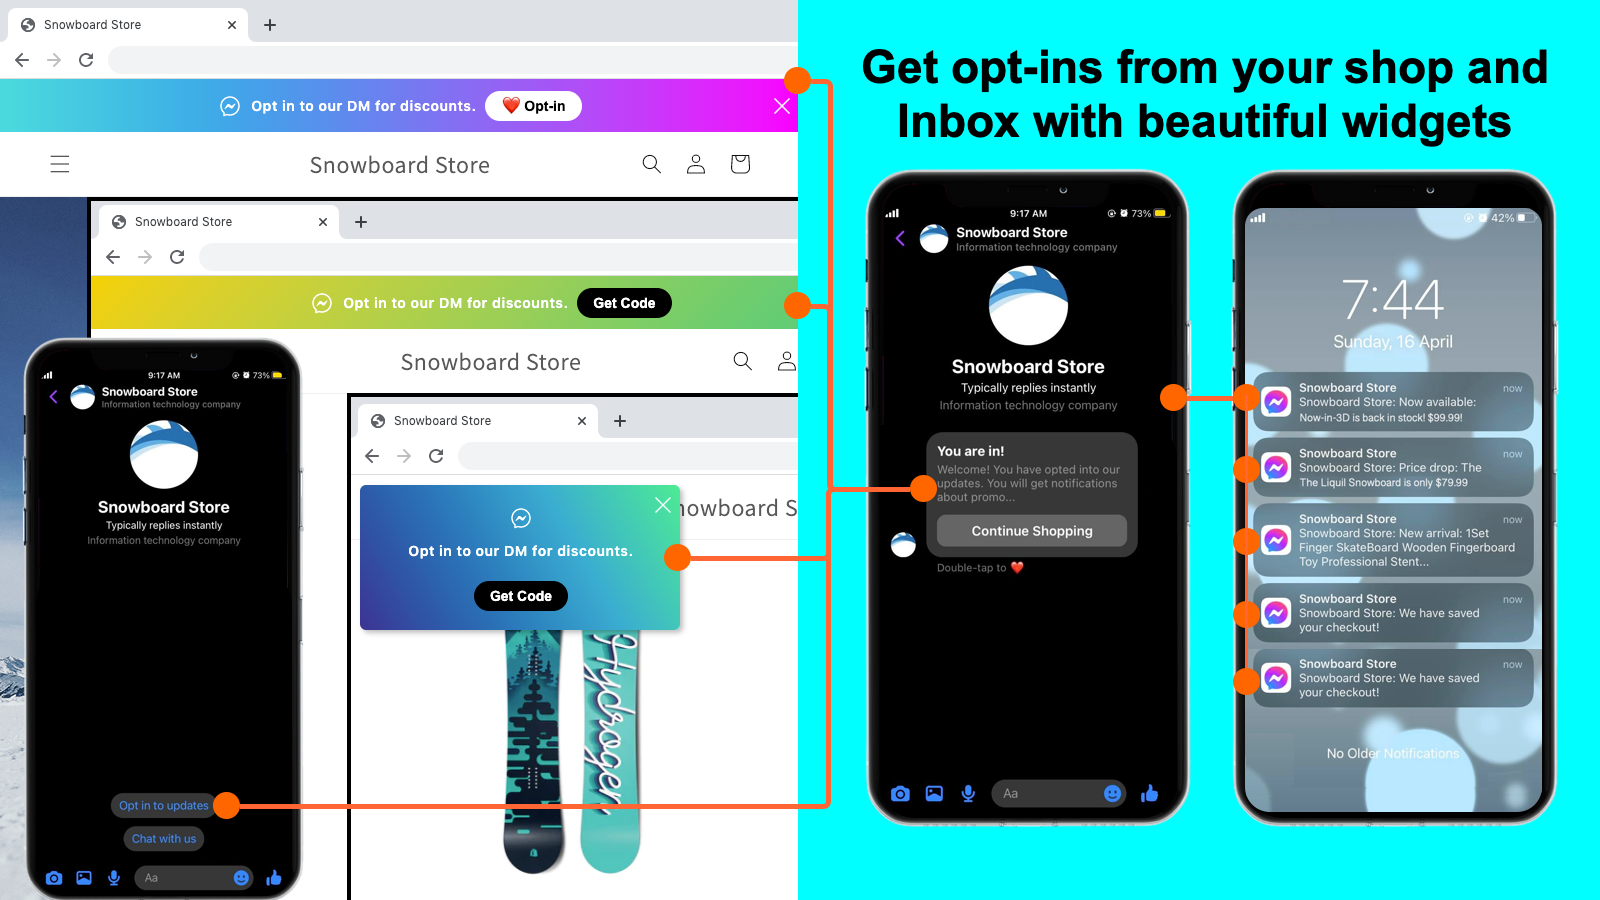 Get opt-ins from your shop and Inbox with beautiful widgets